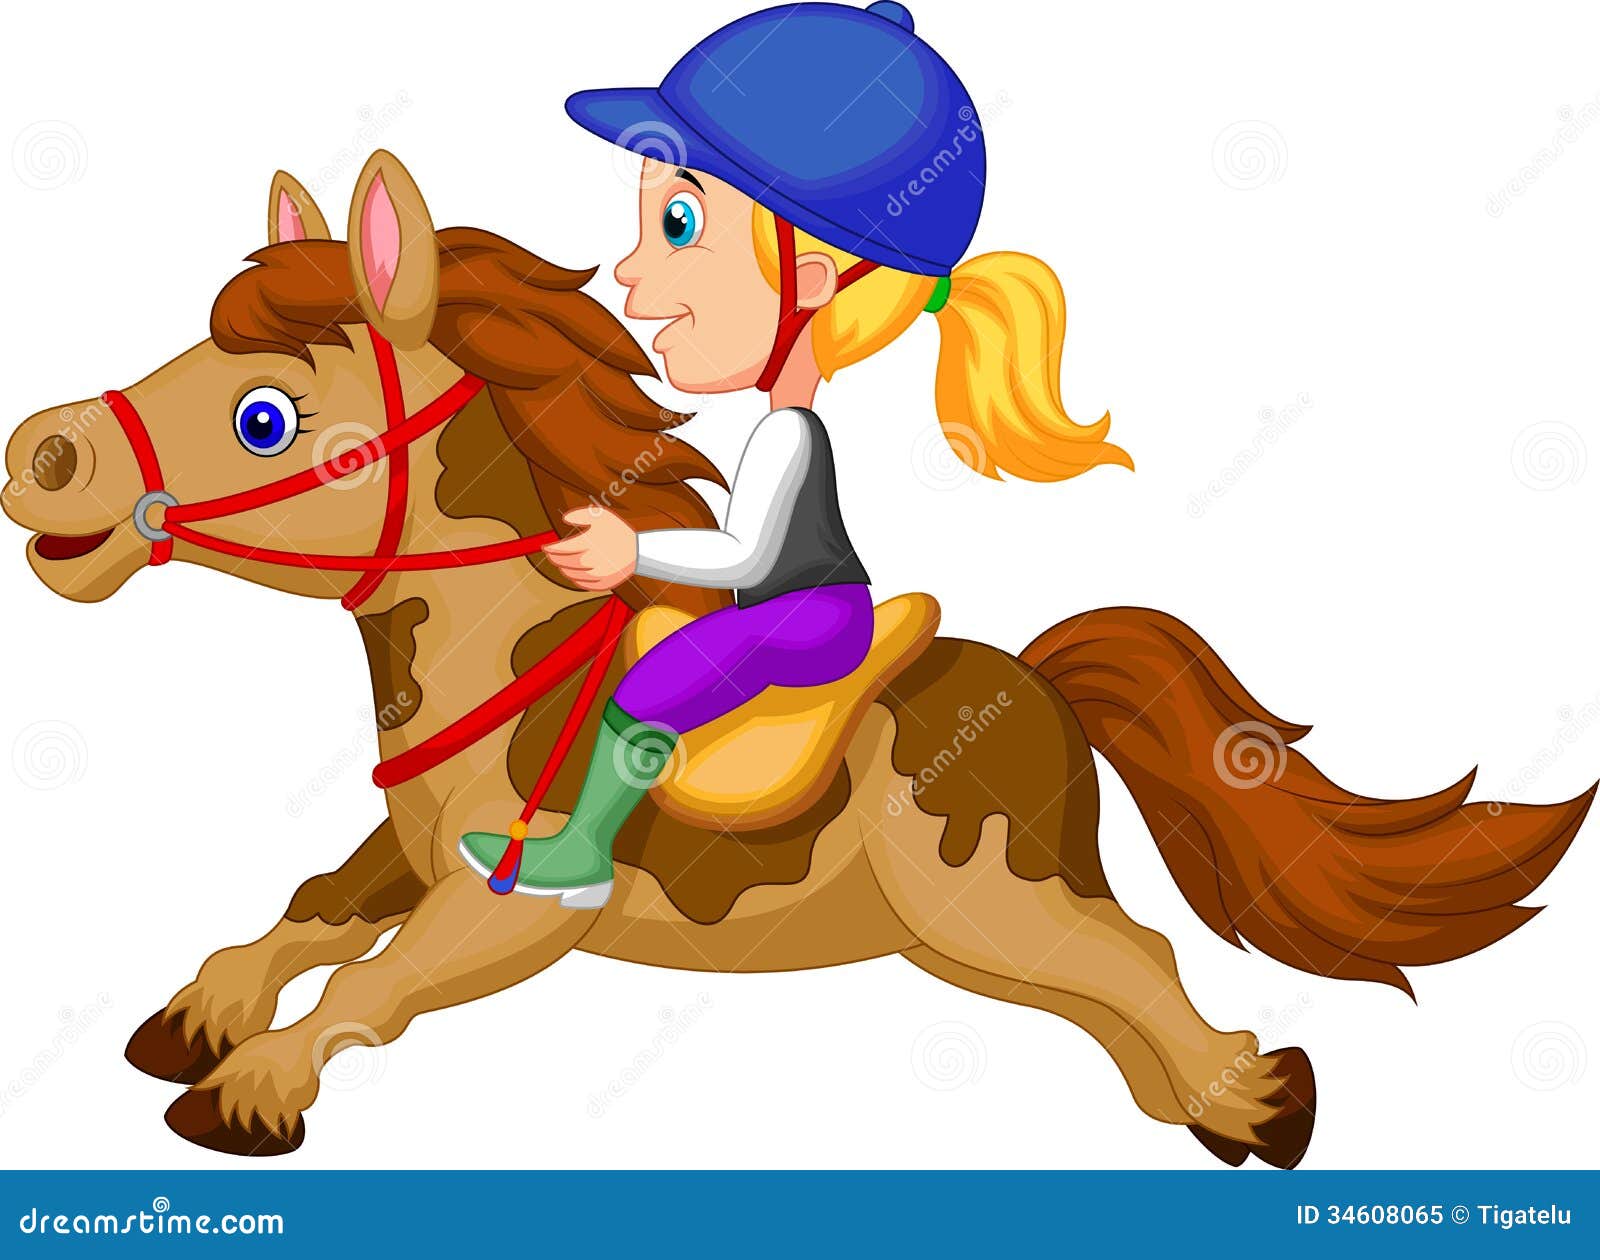 horse and girl clipart - photo #18